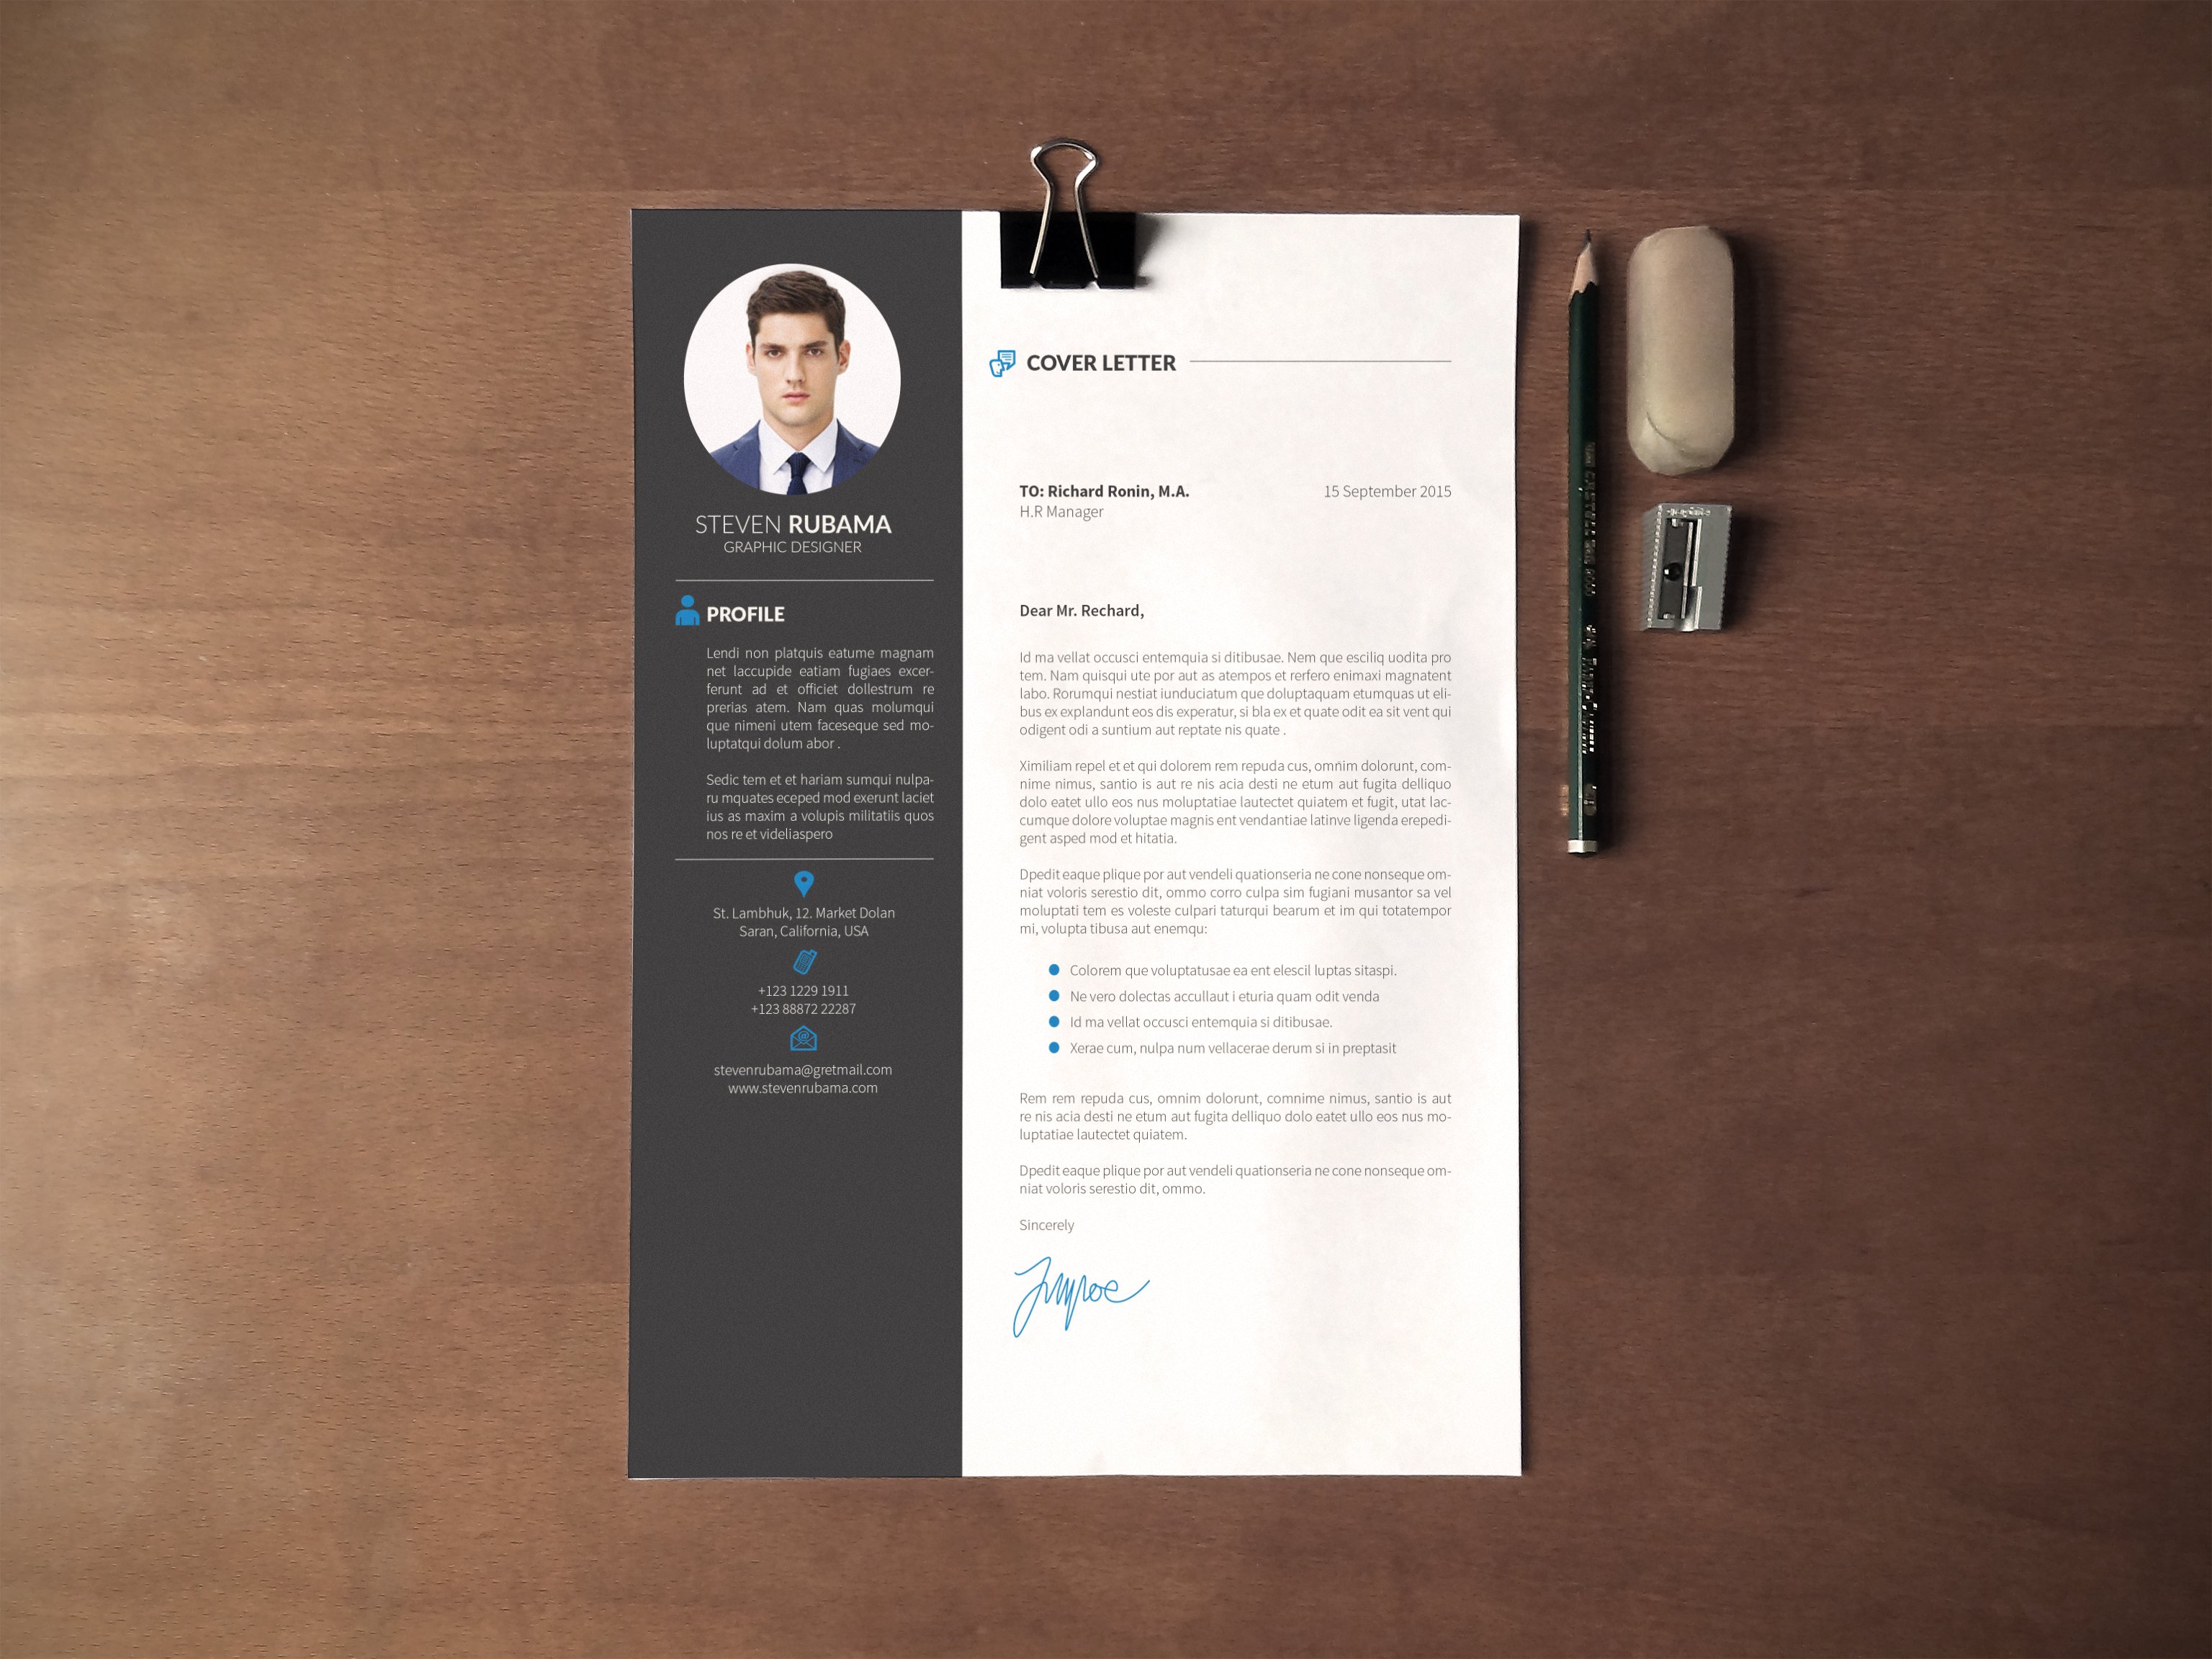 Resume/CV + Cover Letter preview image.